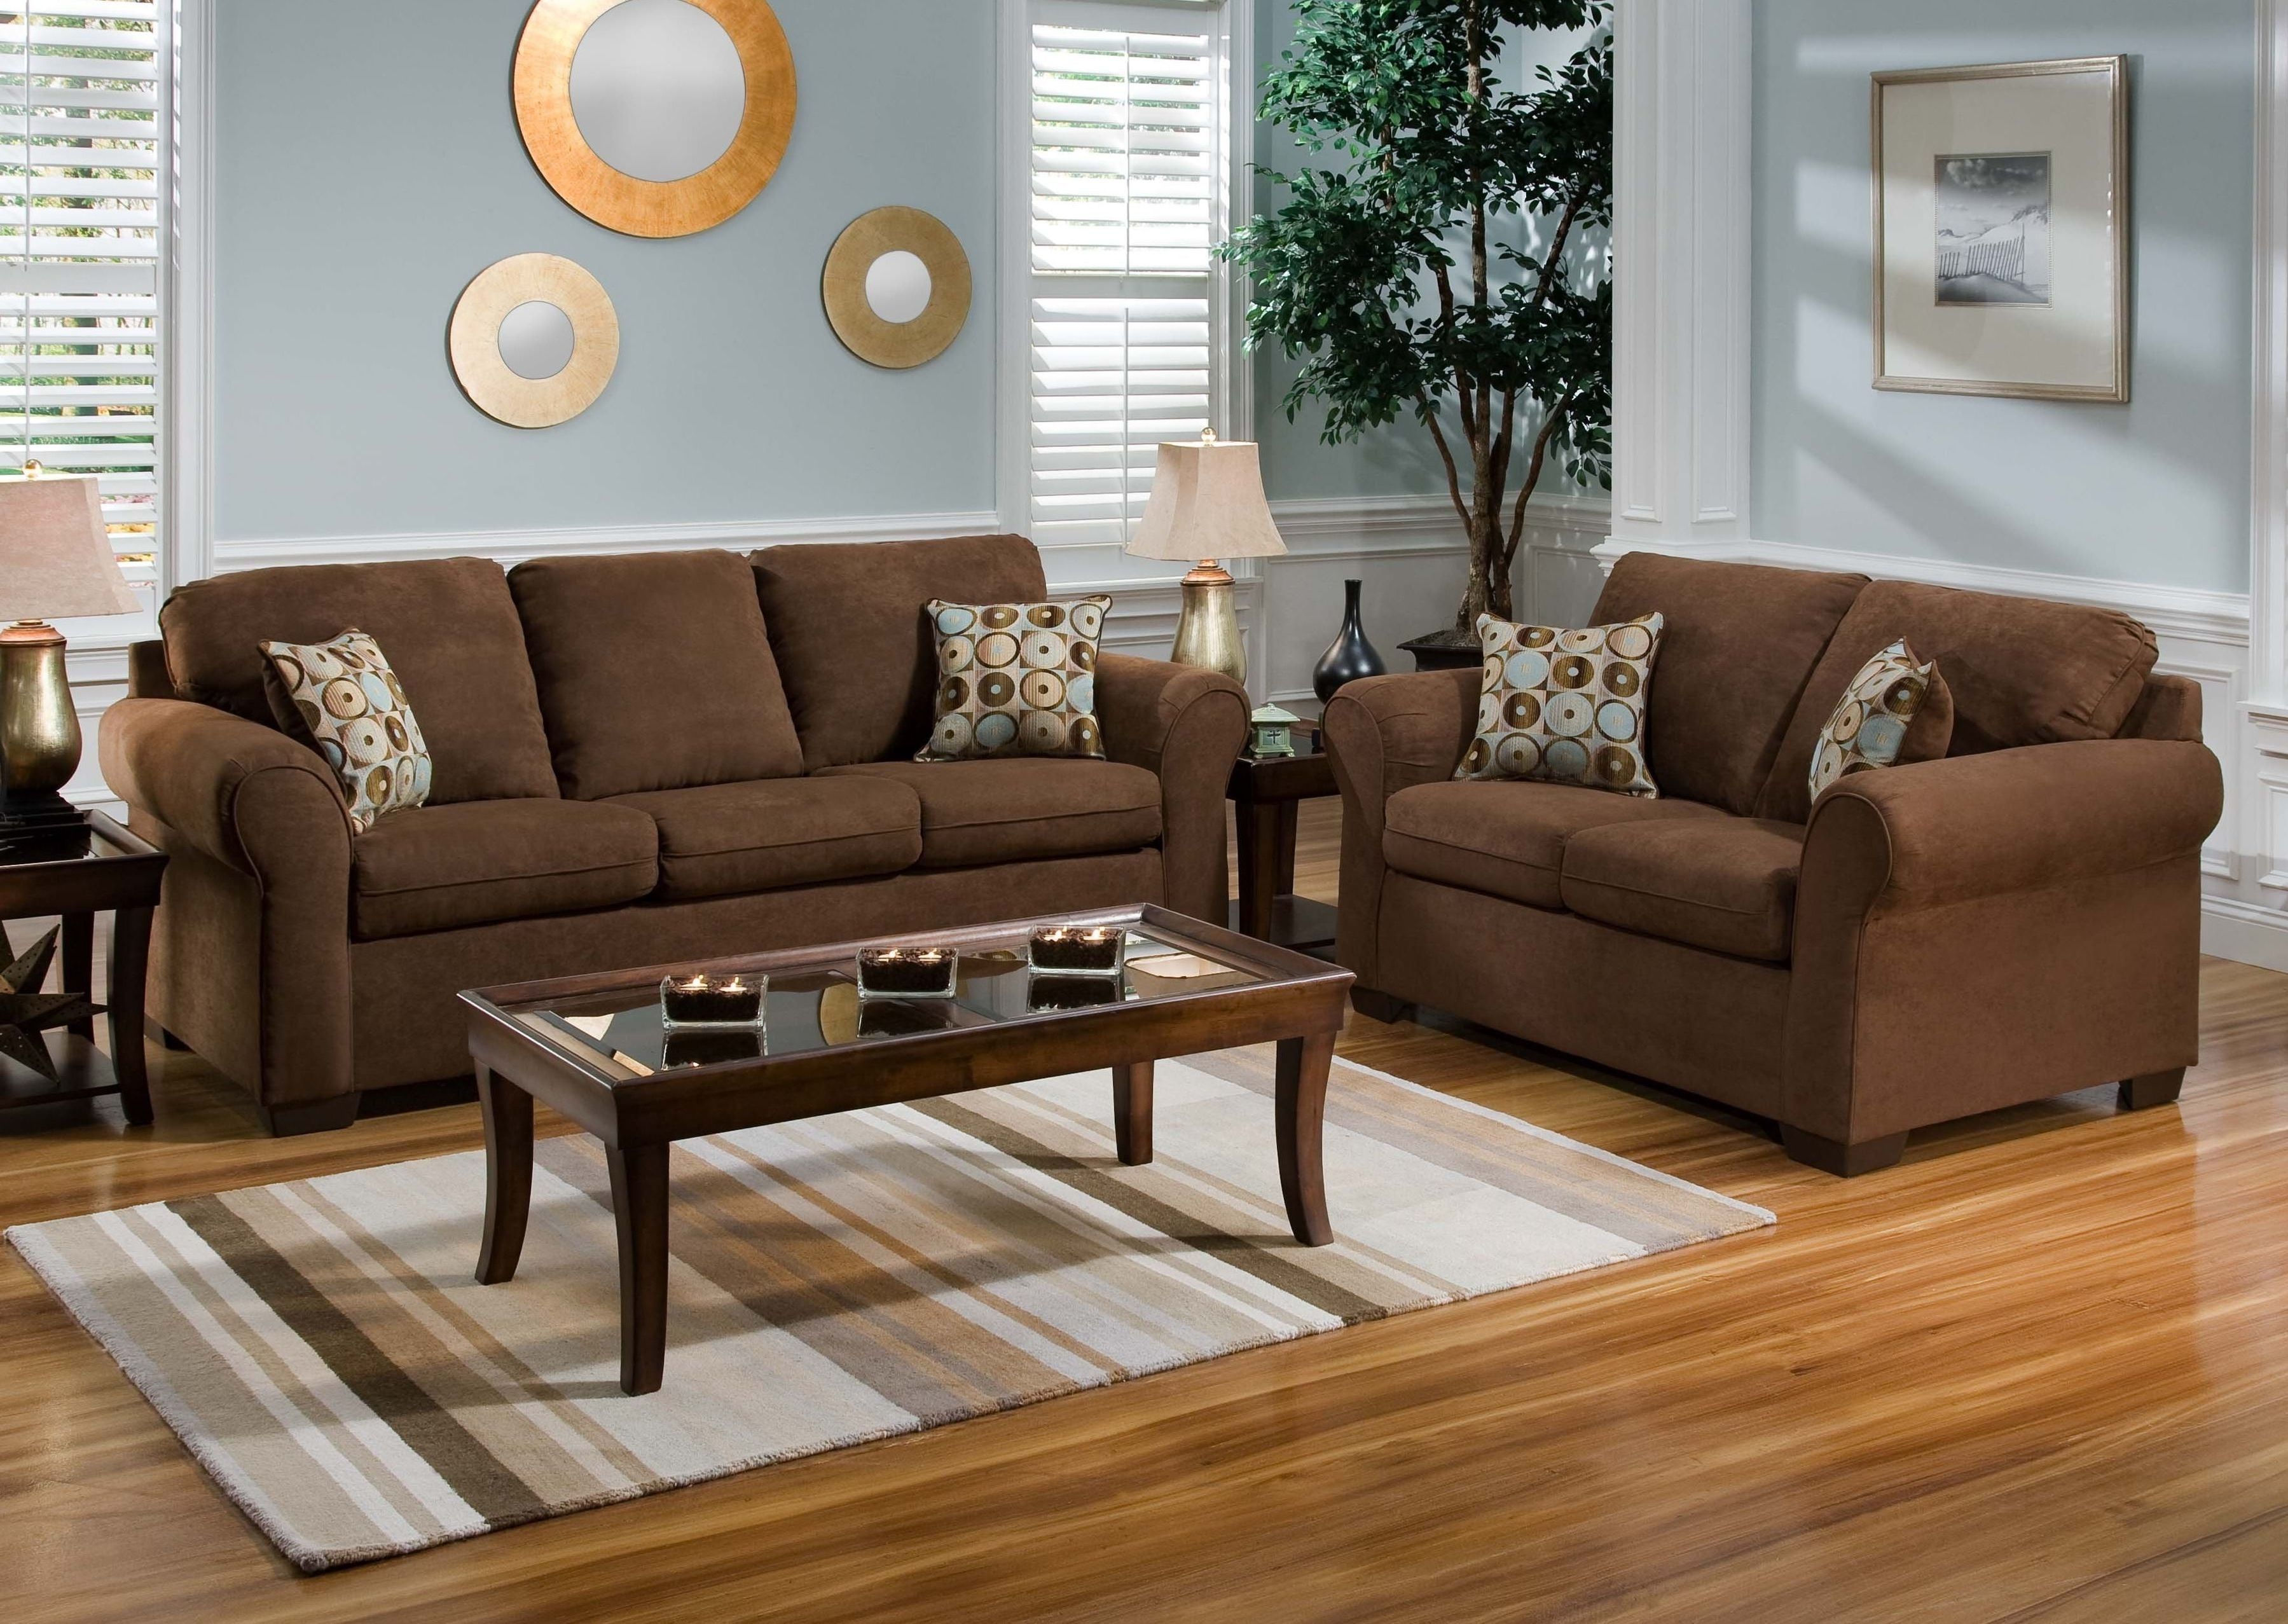 Decorating Living Room With Dark Brown Sofa